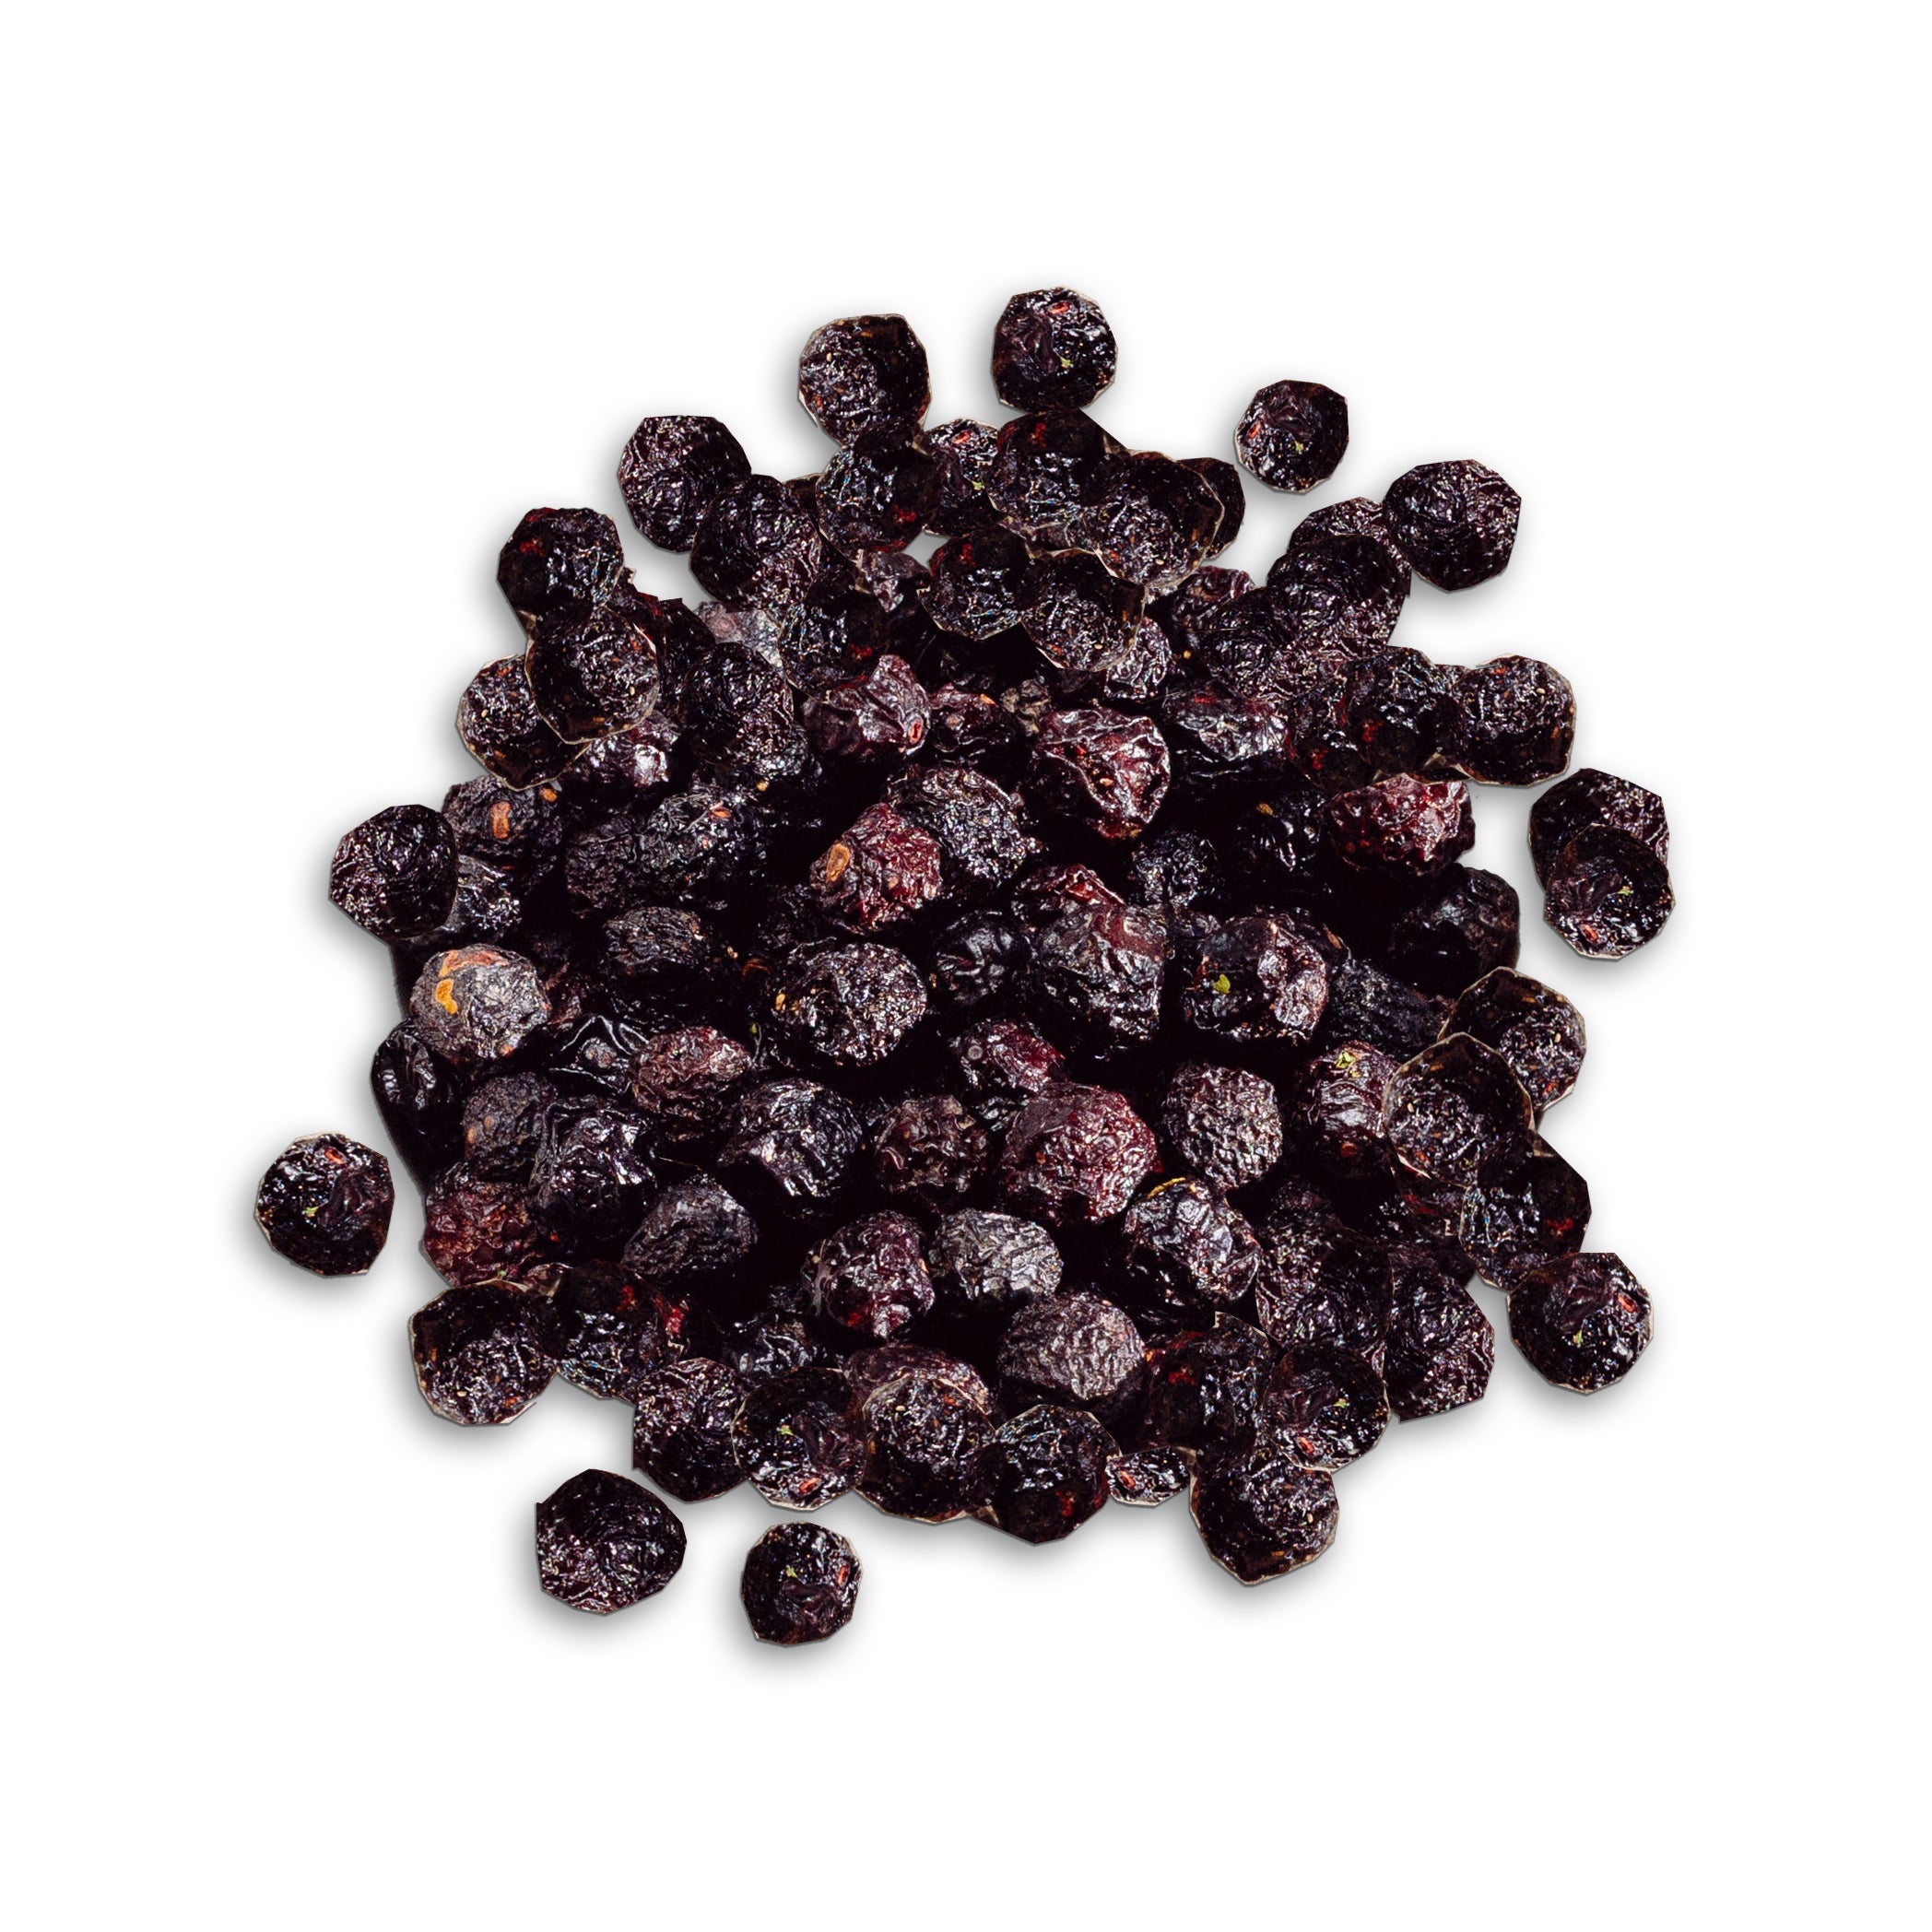 Dried Wild Blueberries (Small Bag)